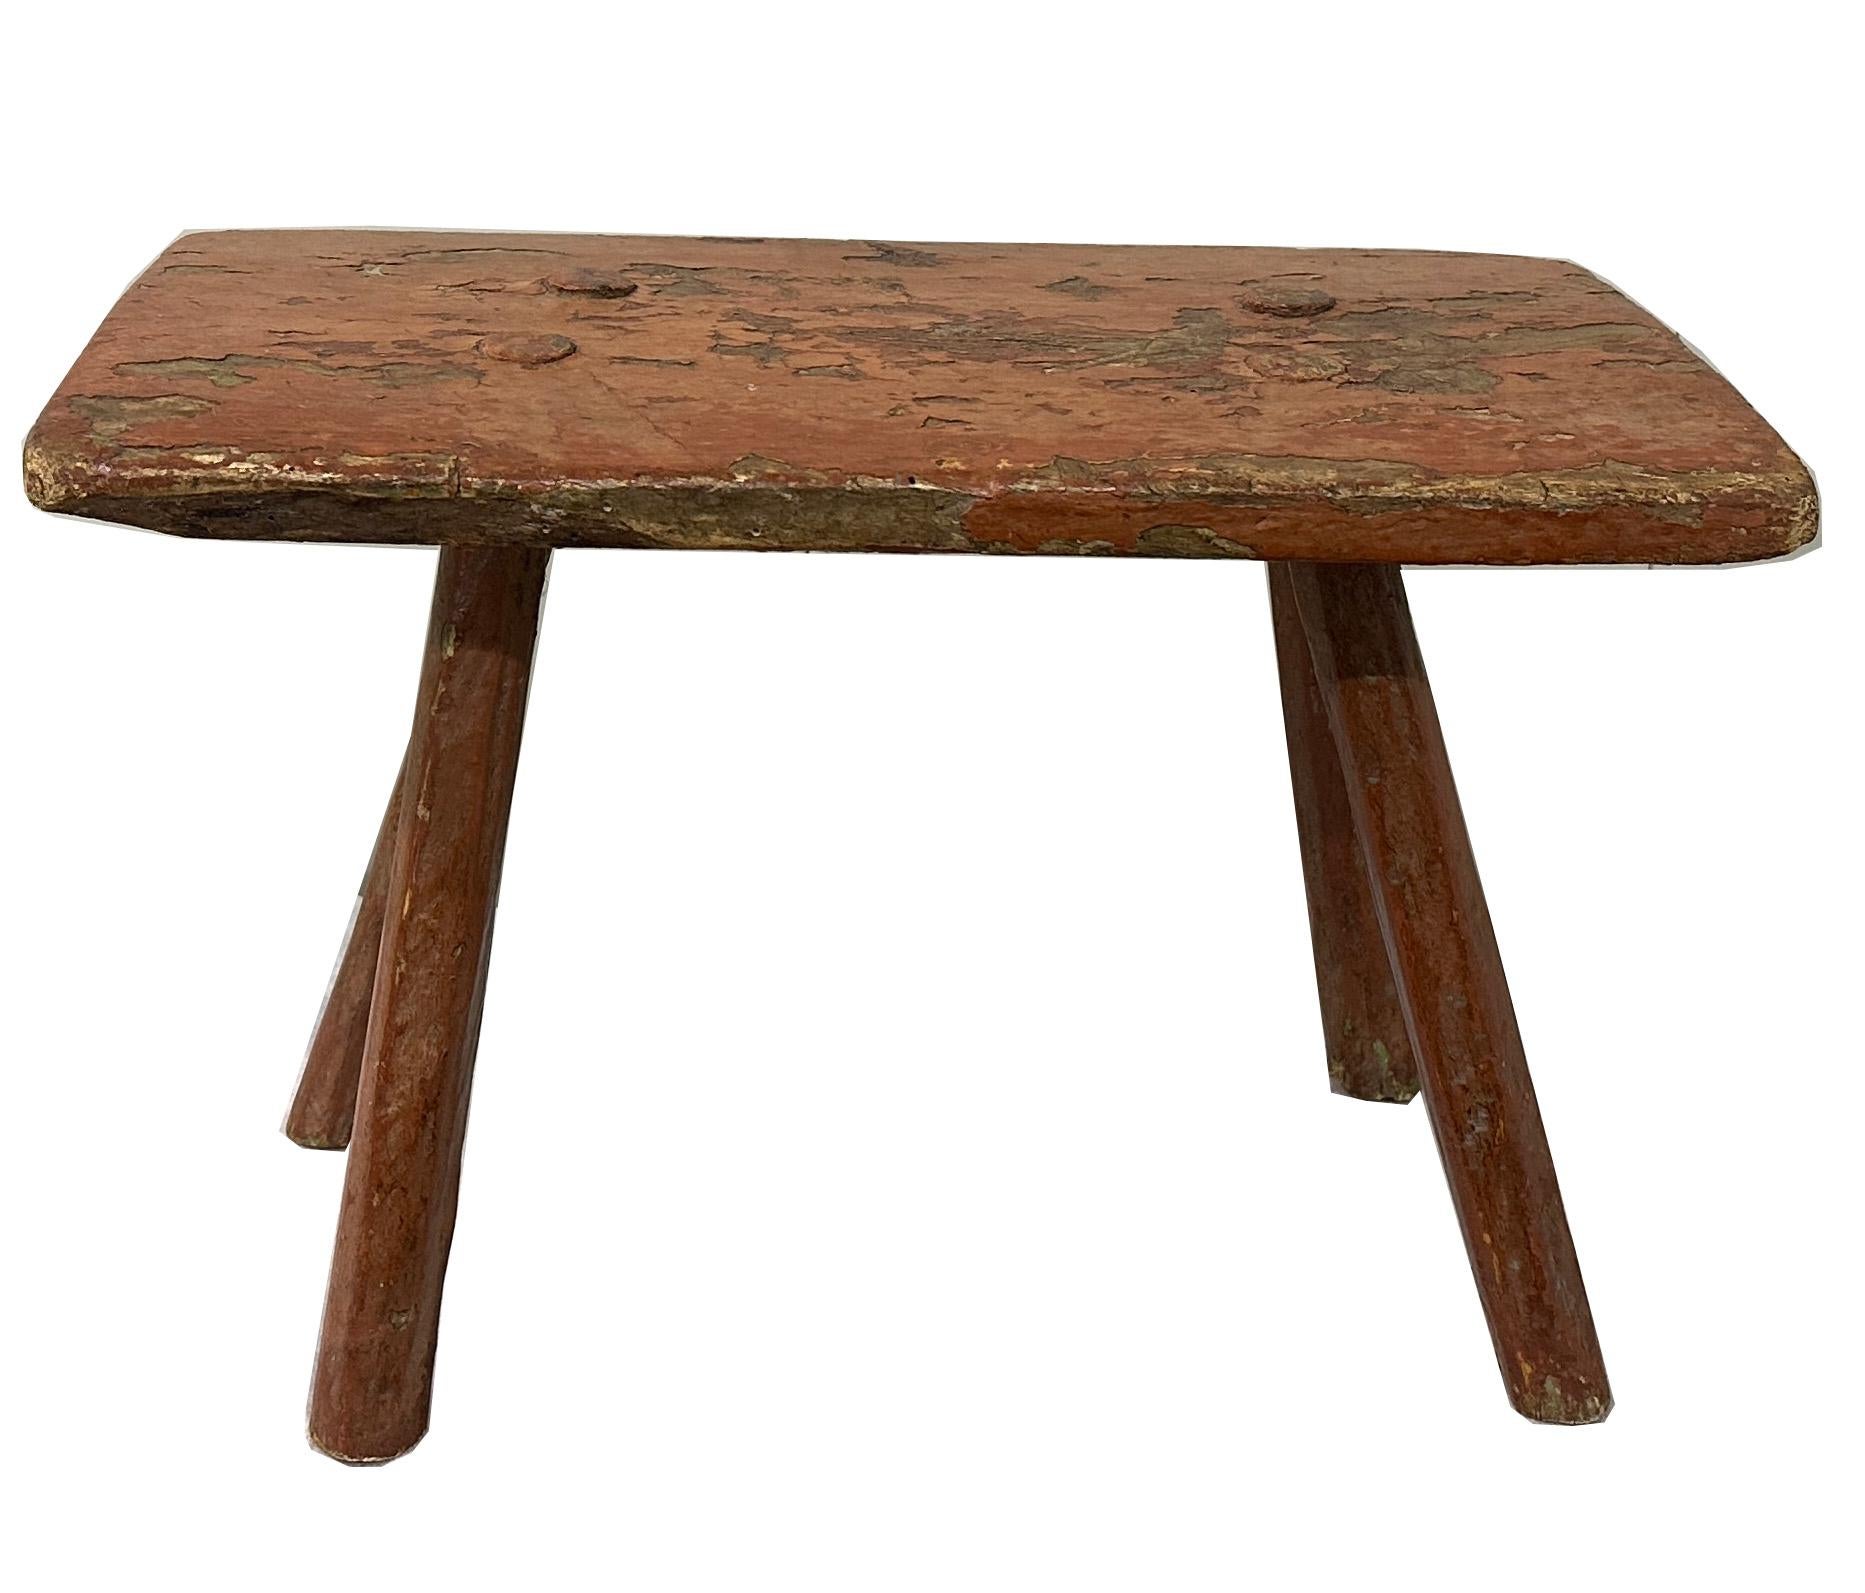 Small 18c Rustic Red Stool In Distressed Condition For Sale In New York, NY